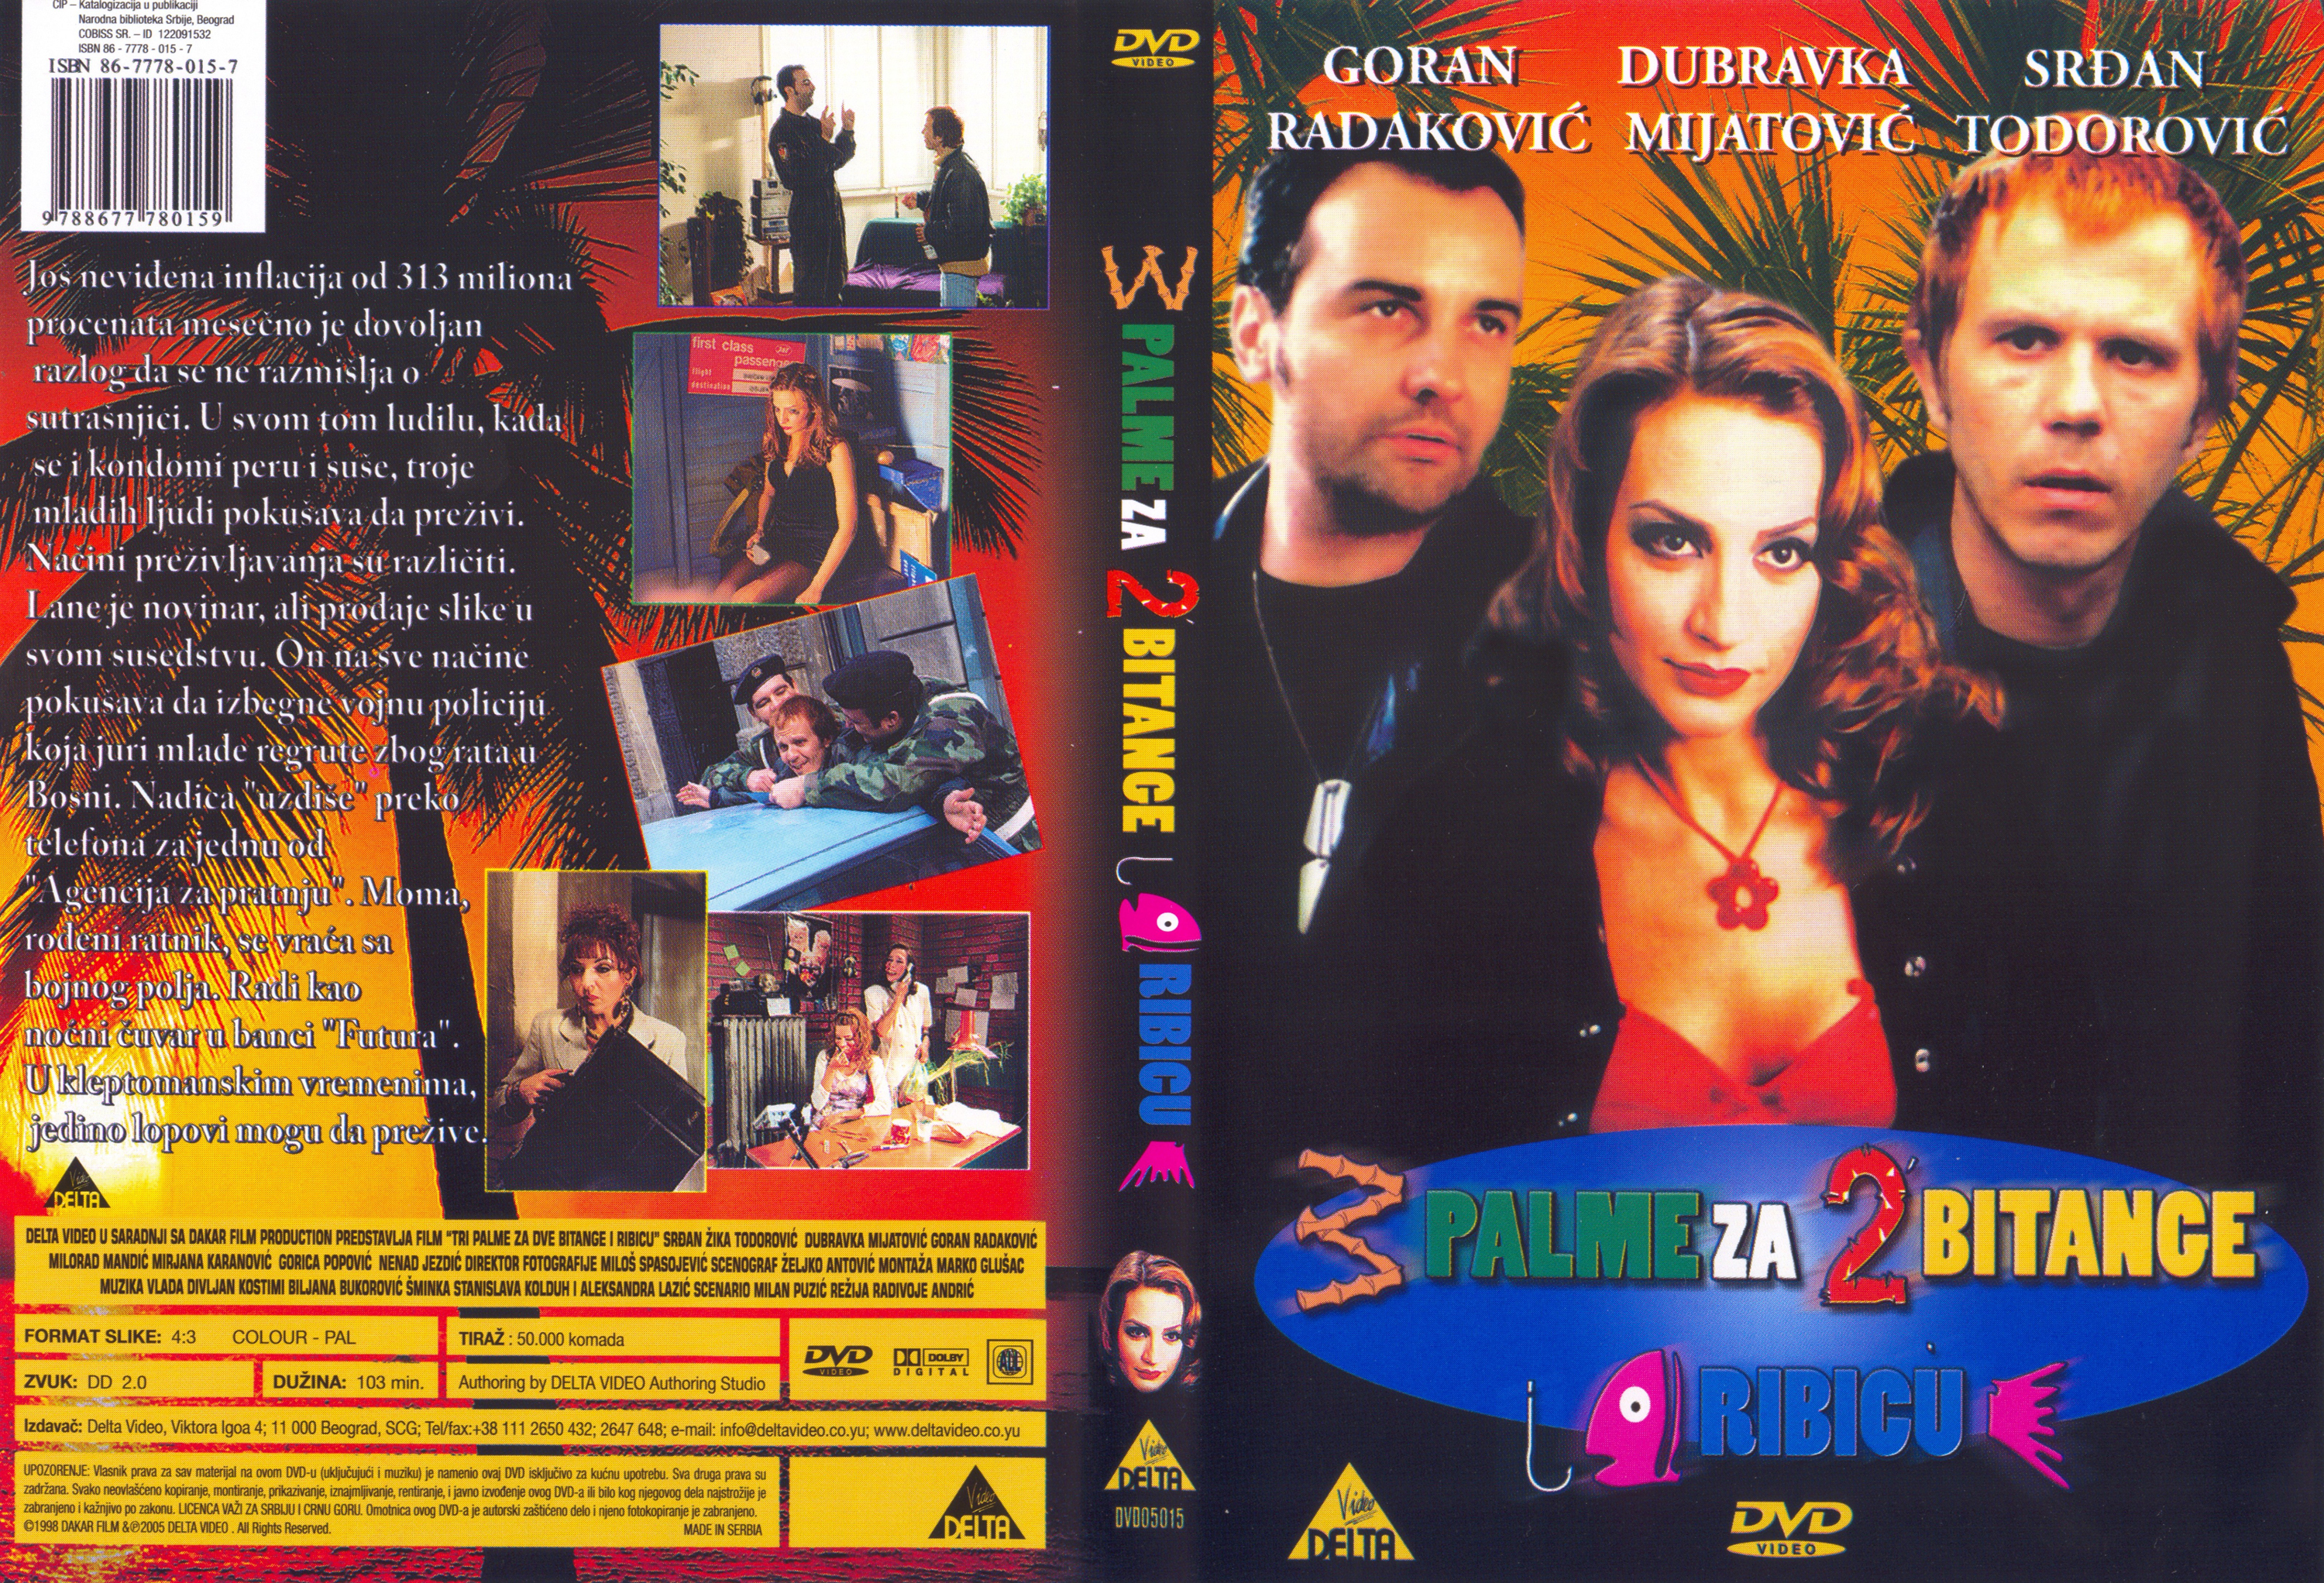 Click to view full size image -  DVD Cover - 0-9 - DVD - 3 PALME ZA 2 BITANGE I RIBICU.jpg - DVD - 3 PALME ZA 2 BITANGE I RIBICU.jpg